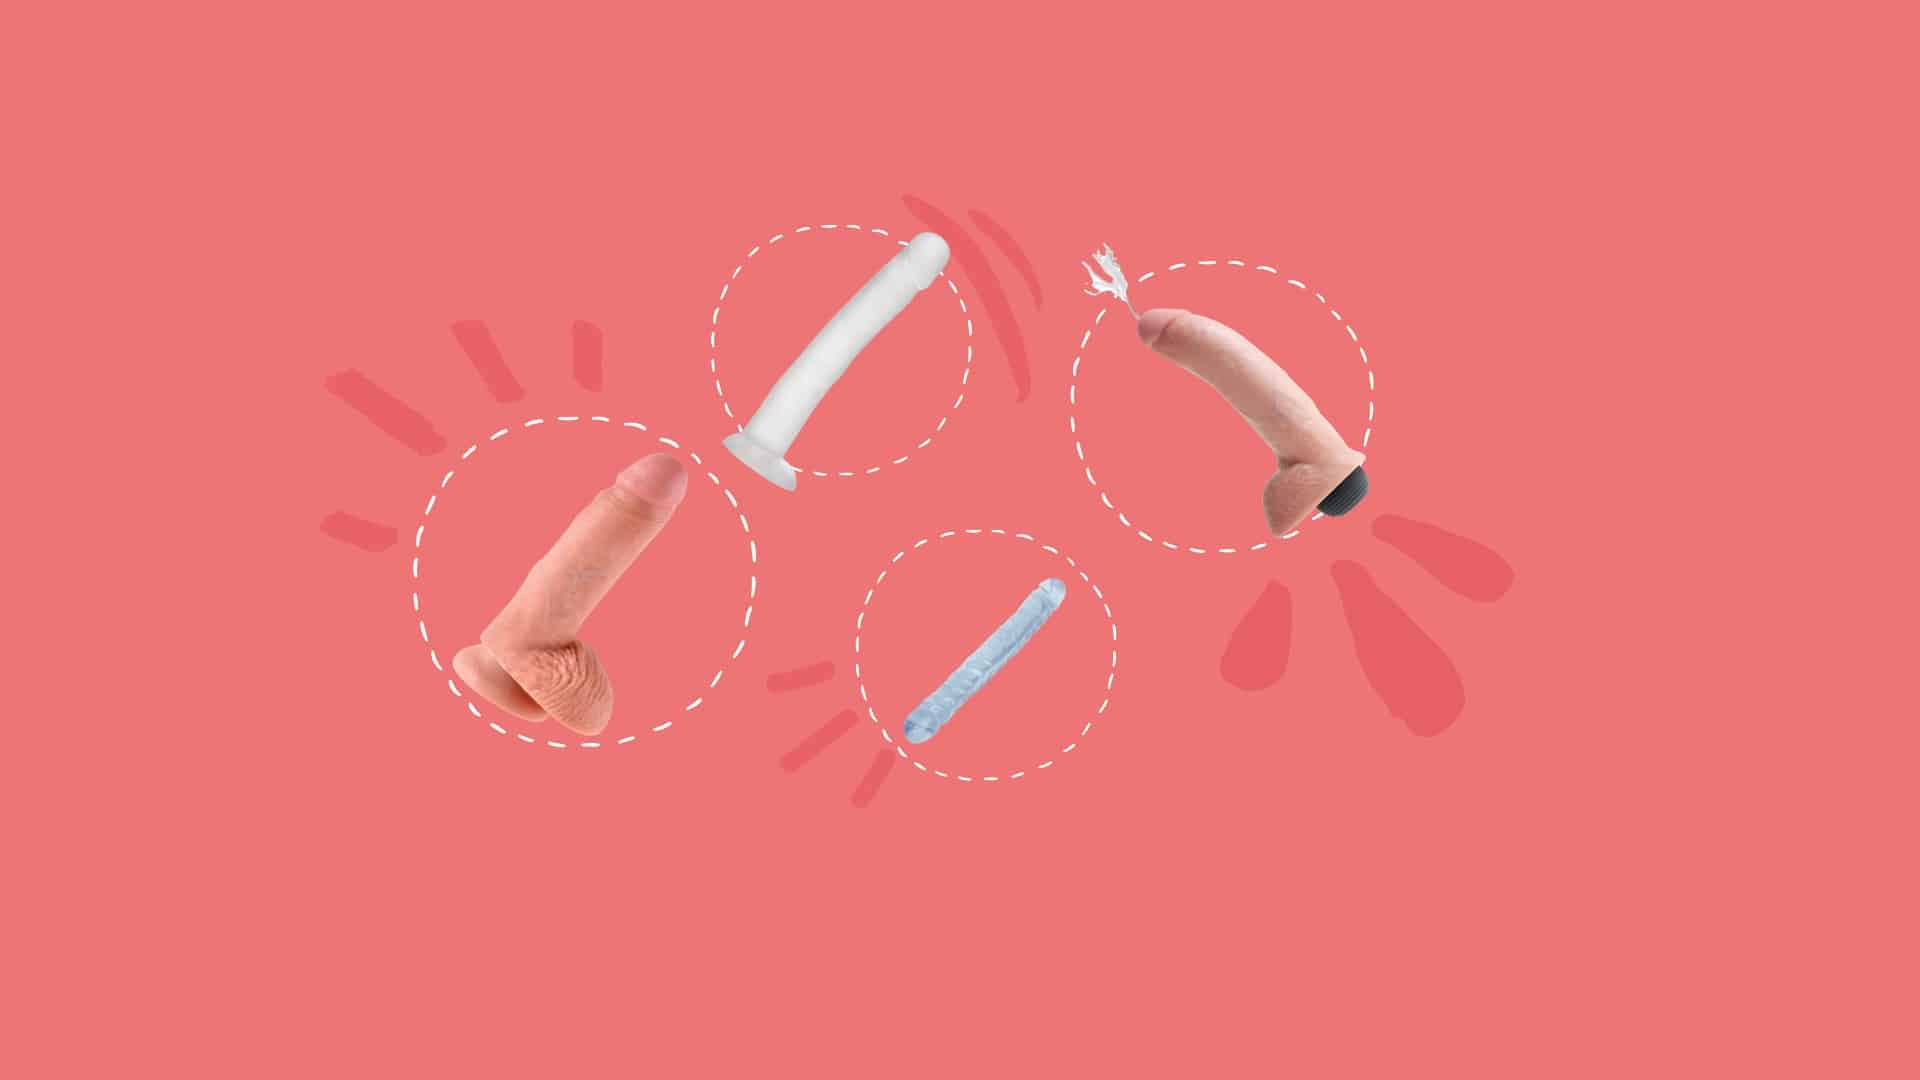 The 8 Best Over 9 Inch Dildos to Fill You Up